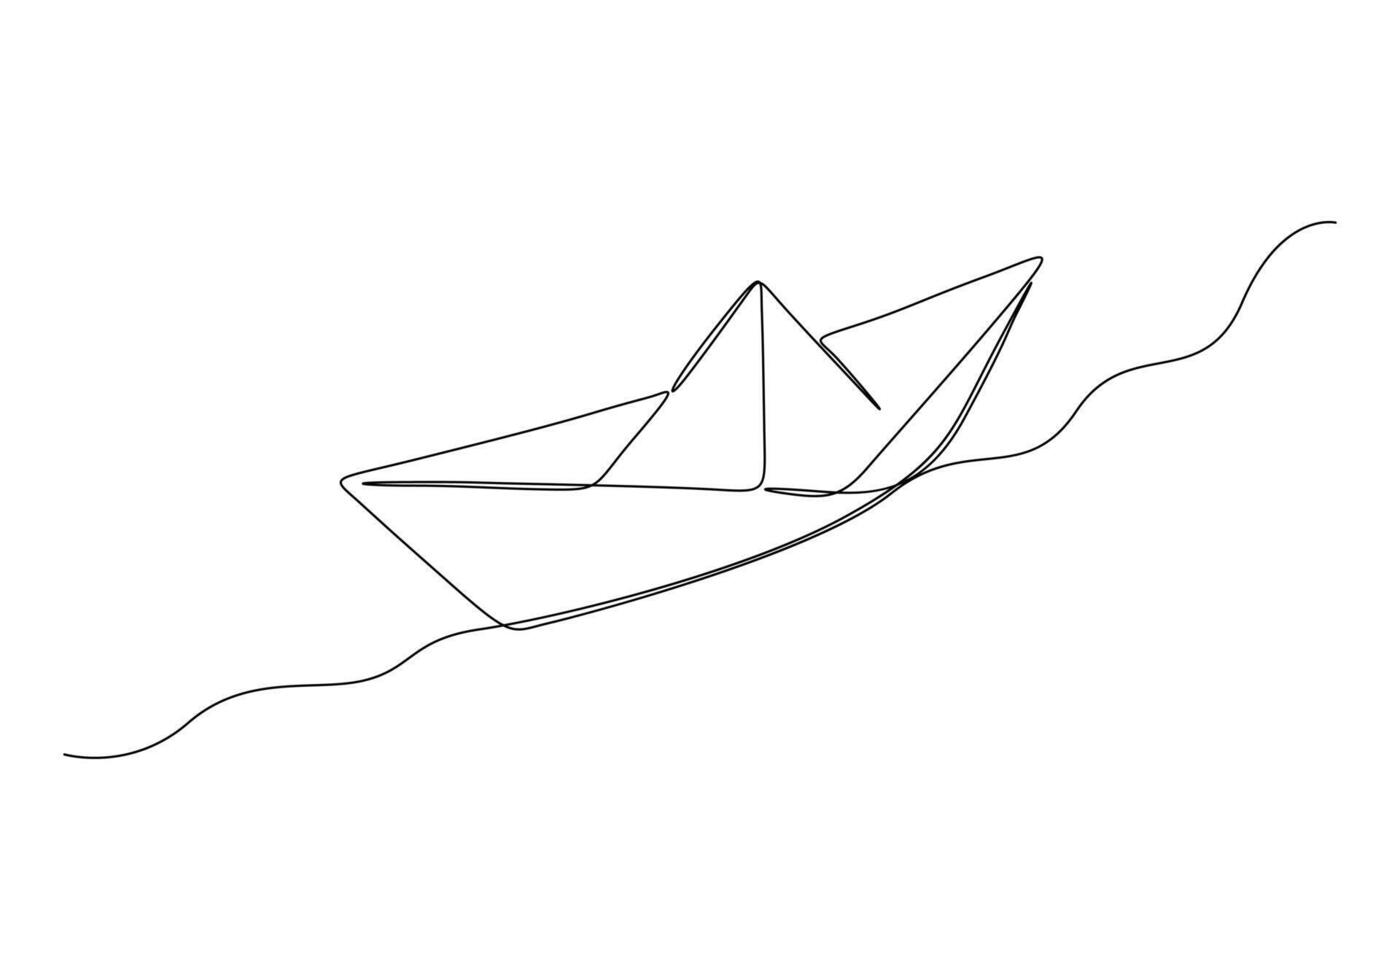 Continuous one line drawing of paper boat origami toy concept vector illustration. Premium vector